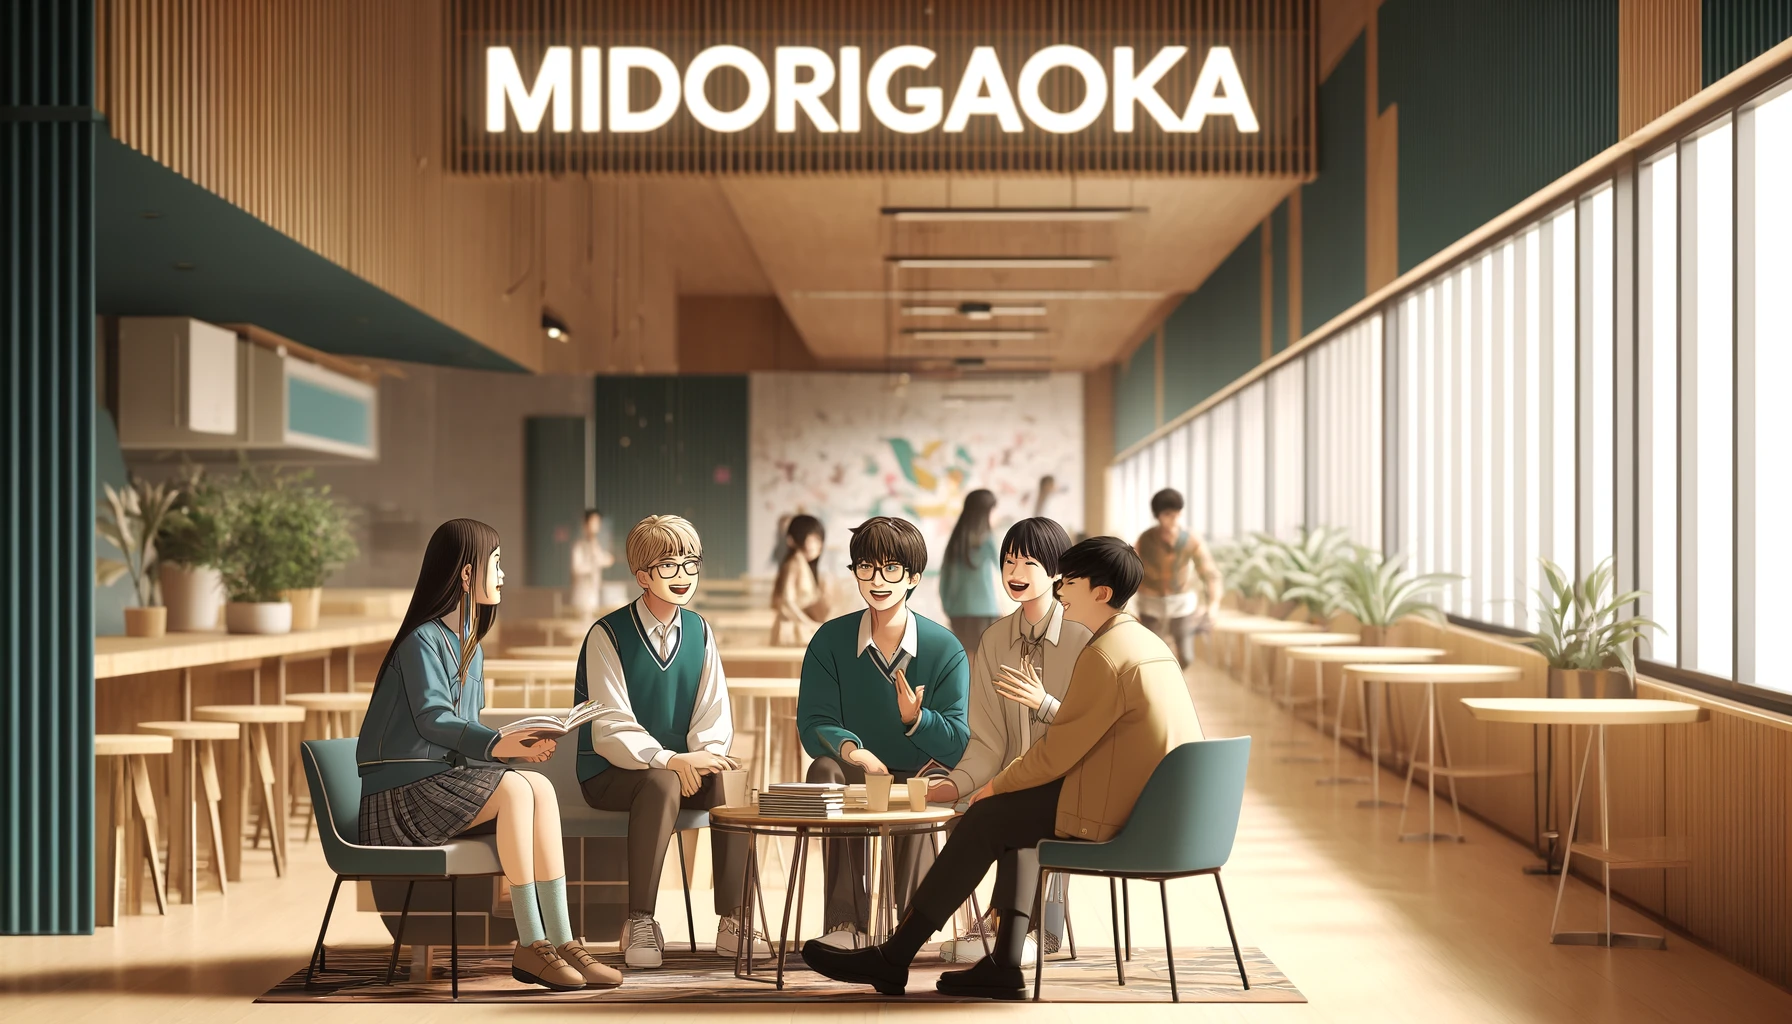 An inviting indoor scene at Midorigaoka High School featuring students engaged in a lively conversation. The image captures a small group of students sitting together in a modern and well-lit classroom or common area, chatting and laughing. They are relaxed and enjoying each other's company, illustrating the friendly and inclusive atmosphere of the school. The background includes elements of the school’s contemporary design, such as stylish furniture and educational posters. The word 'MIDORIGAOKA' is prominently displayed, emphasizing the school's vibrant community and welcoming environment.